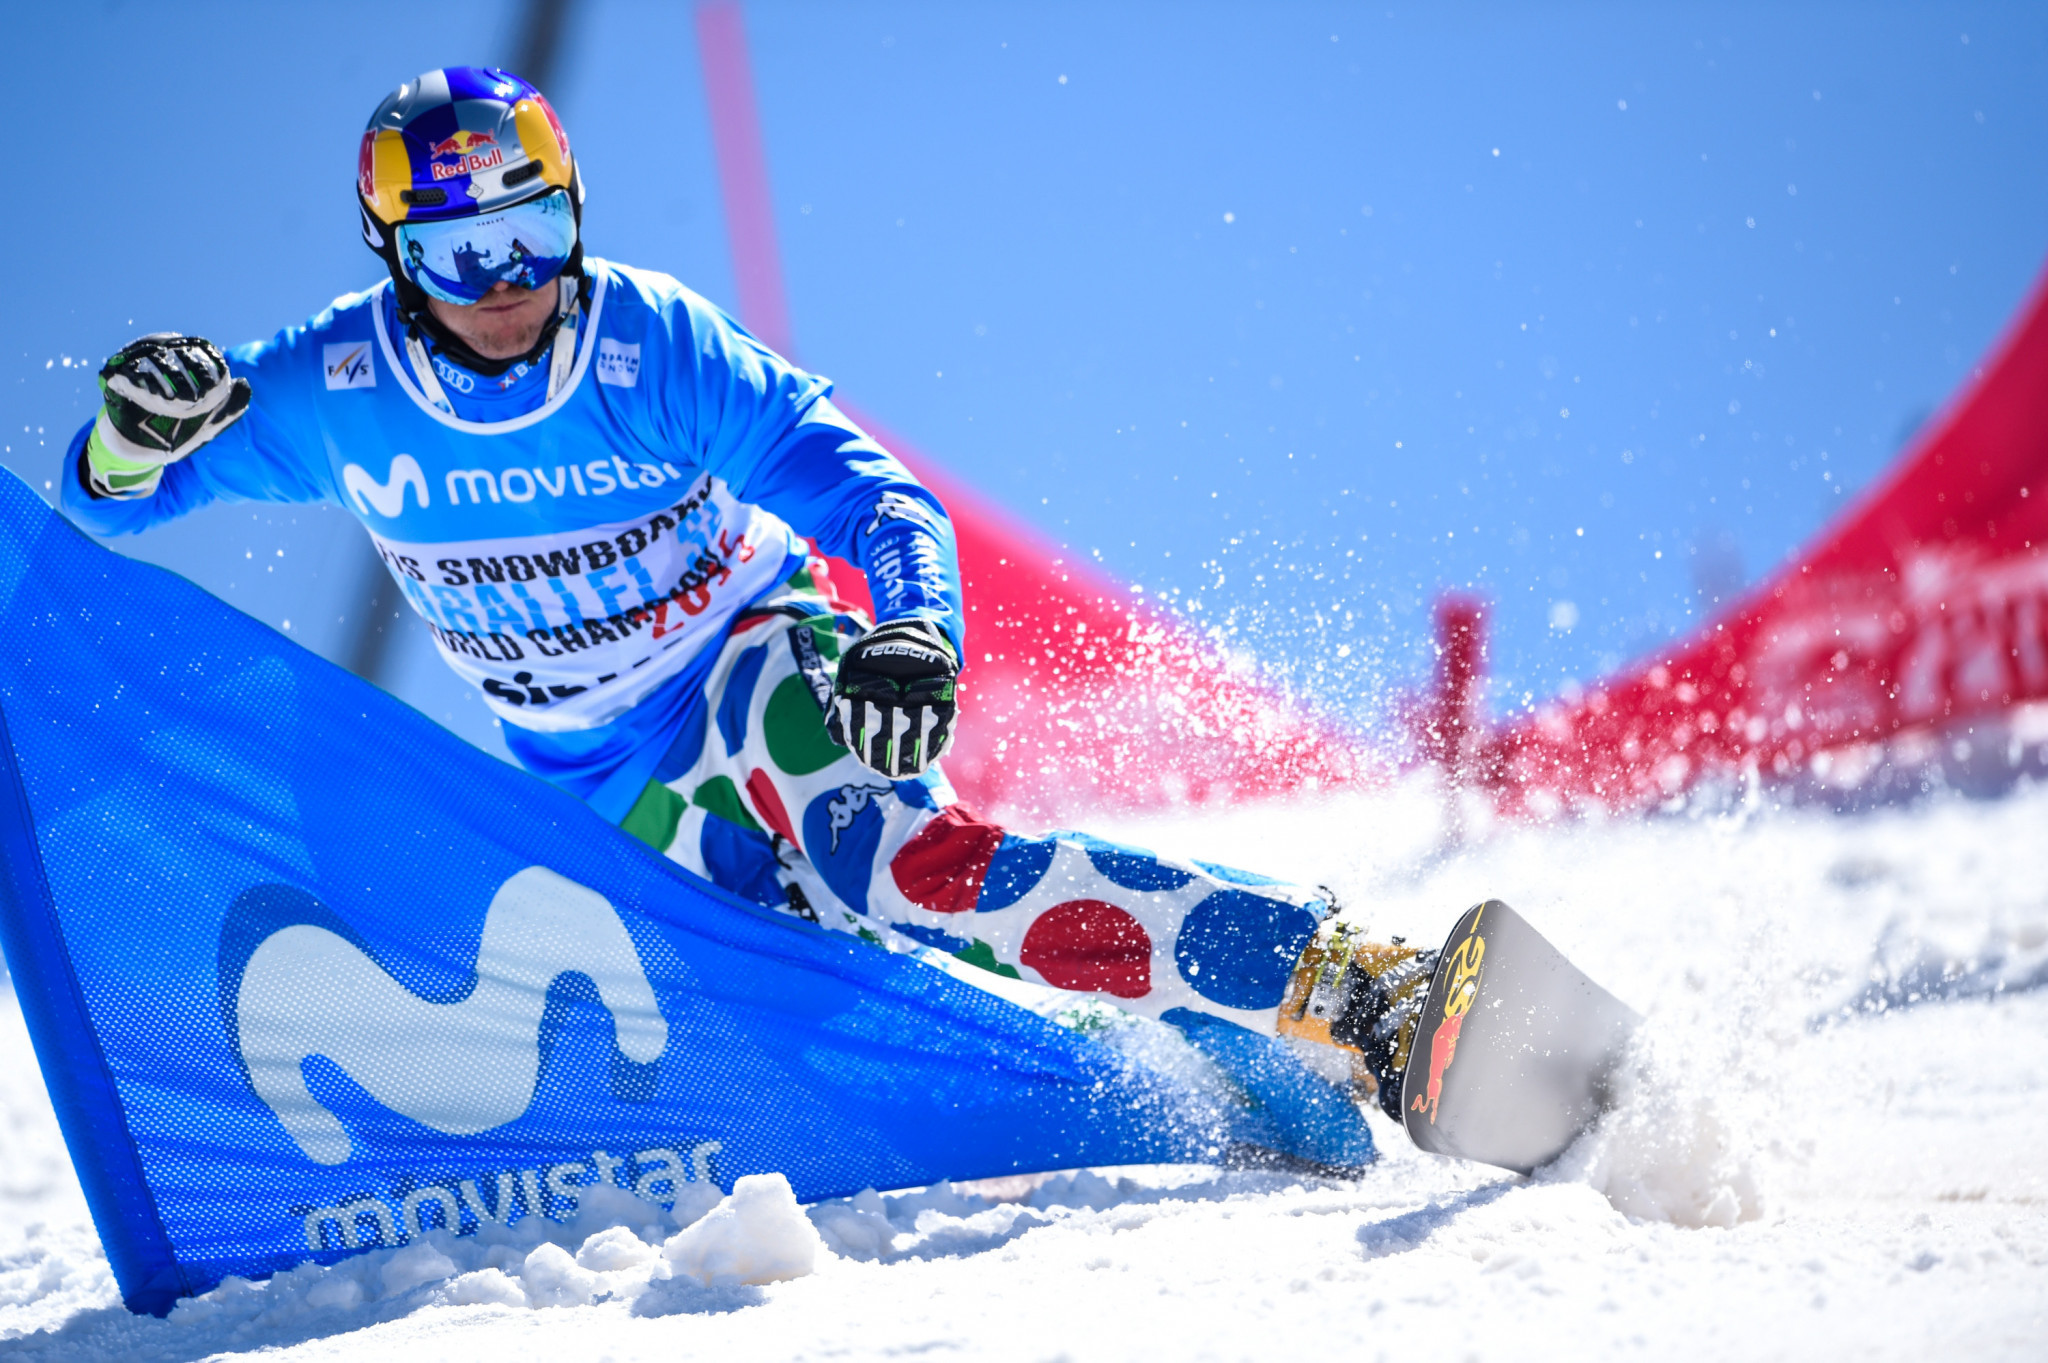 Roland Fischnaller won the only parallel slalom event of the season so far ©Getty Images